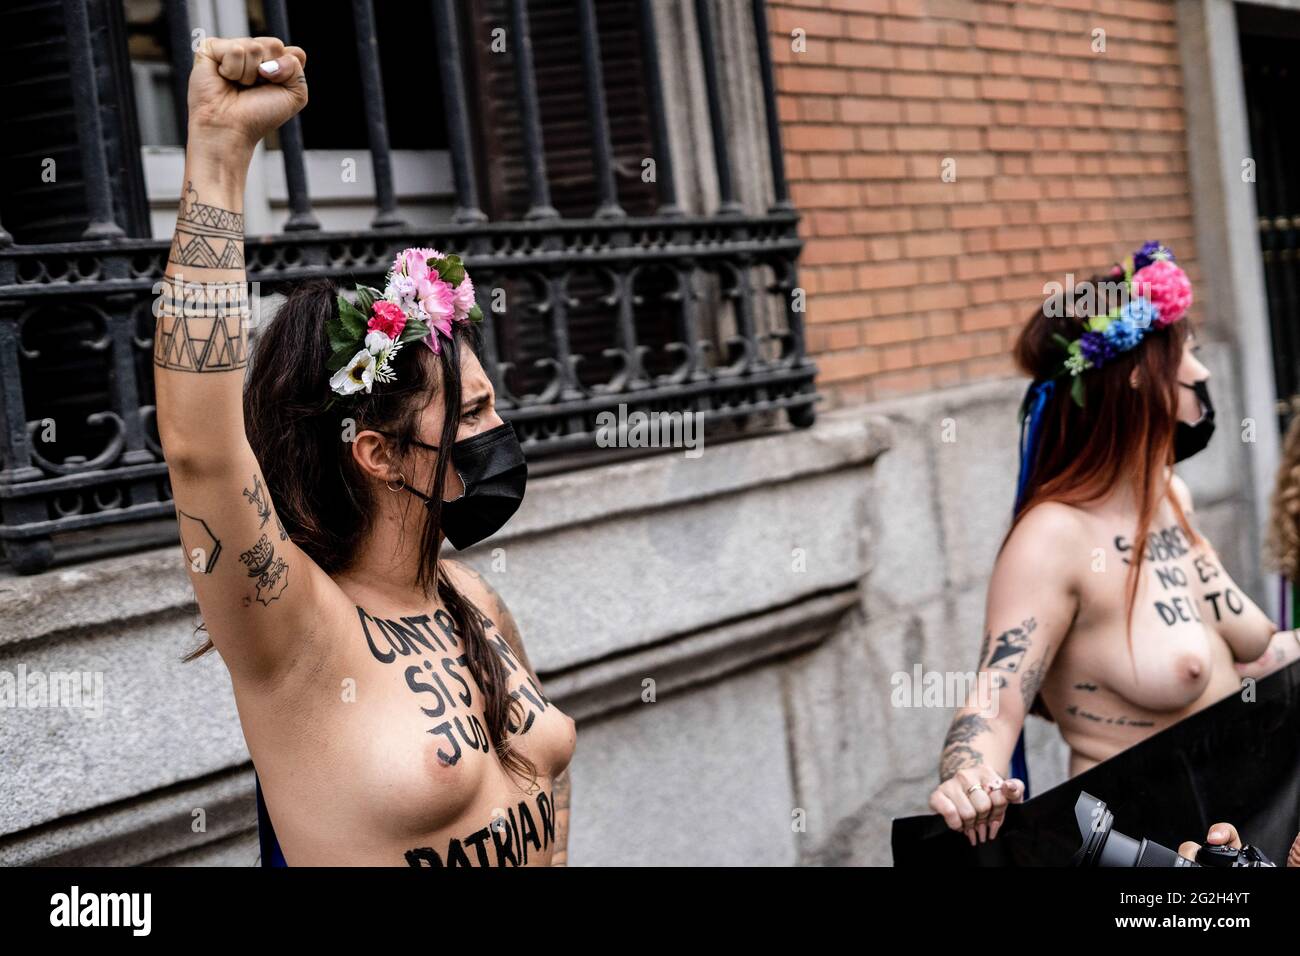 EDITORS NOTE Image contains nudity.) A protester seen making gestures in front of the Justice Ministry during the demonstration